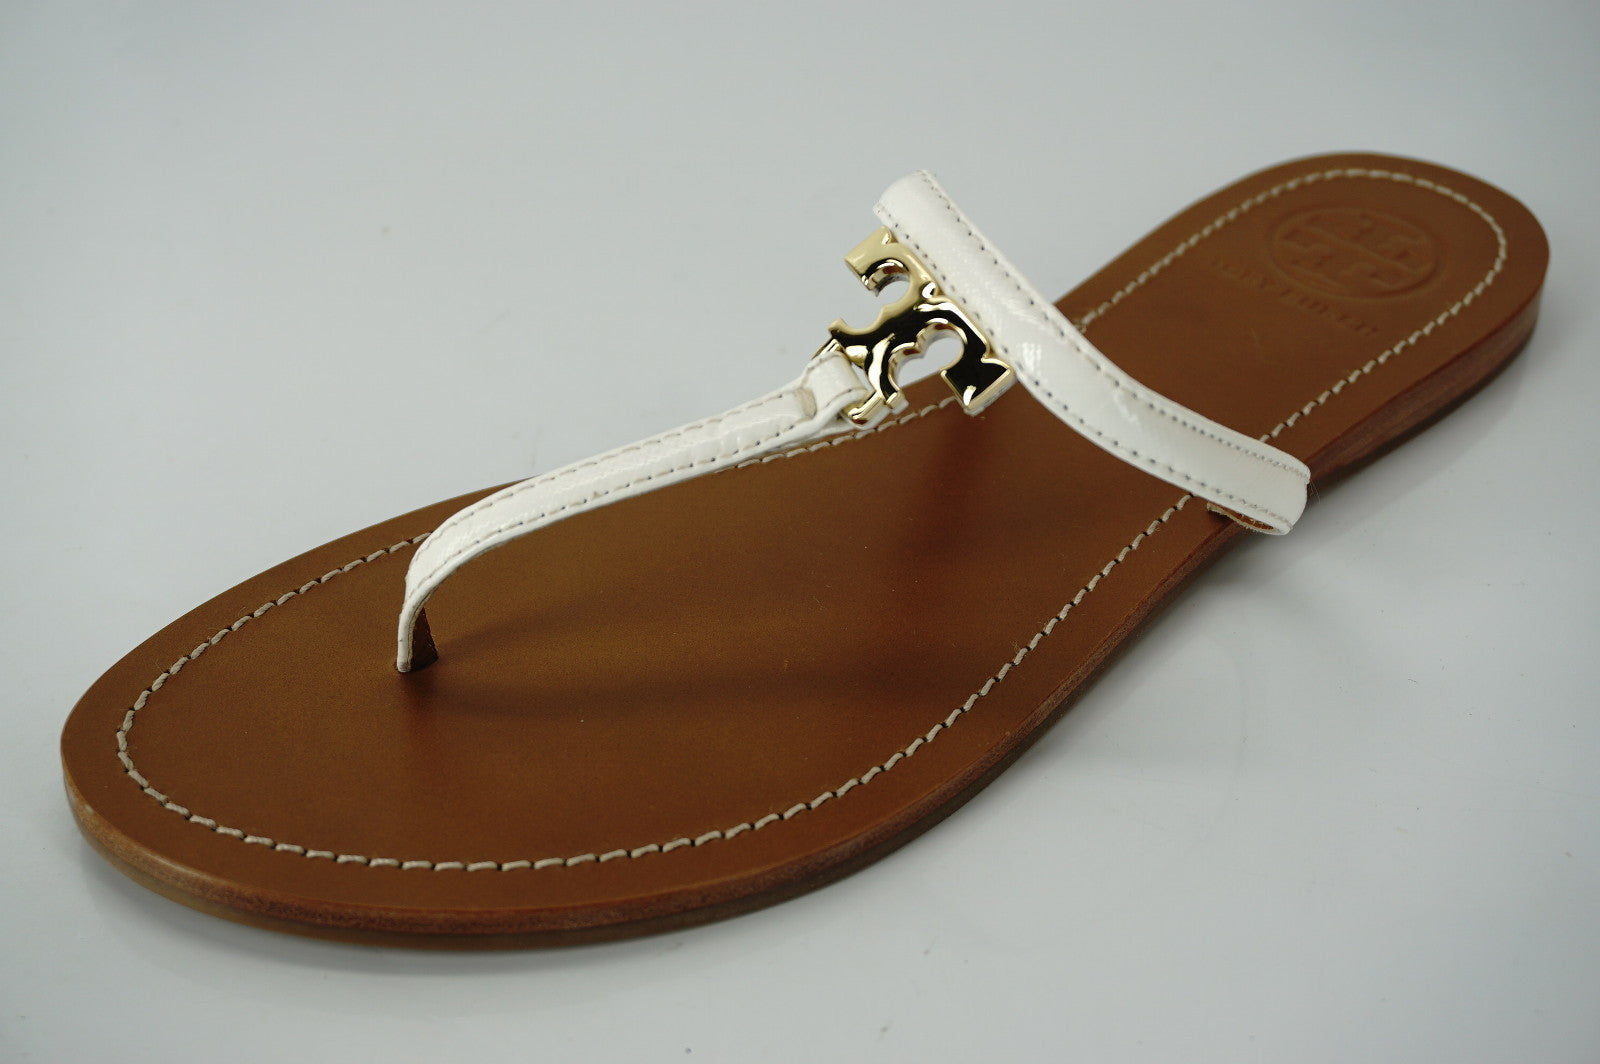 Tory Burch Ivory Patent T Logo Leather Thong Sandals Size 10 flip flop NIB $175